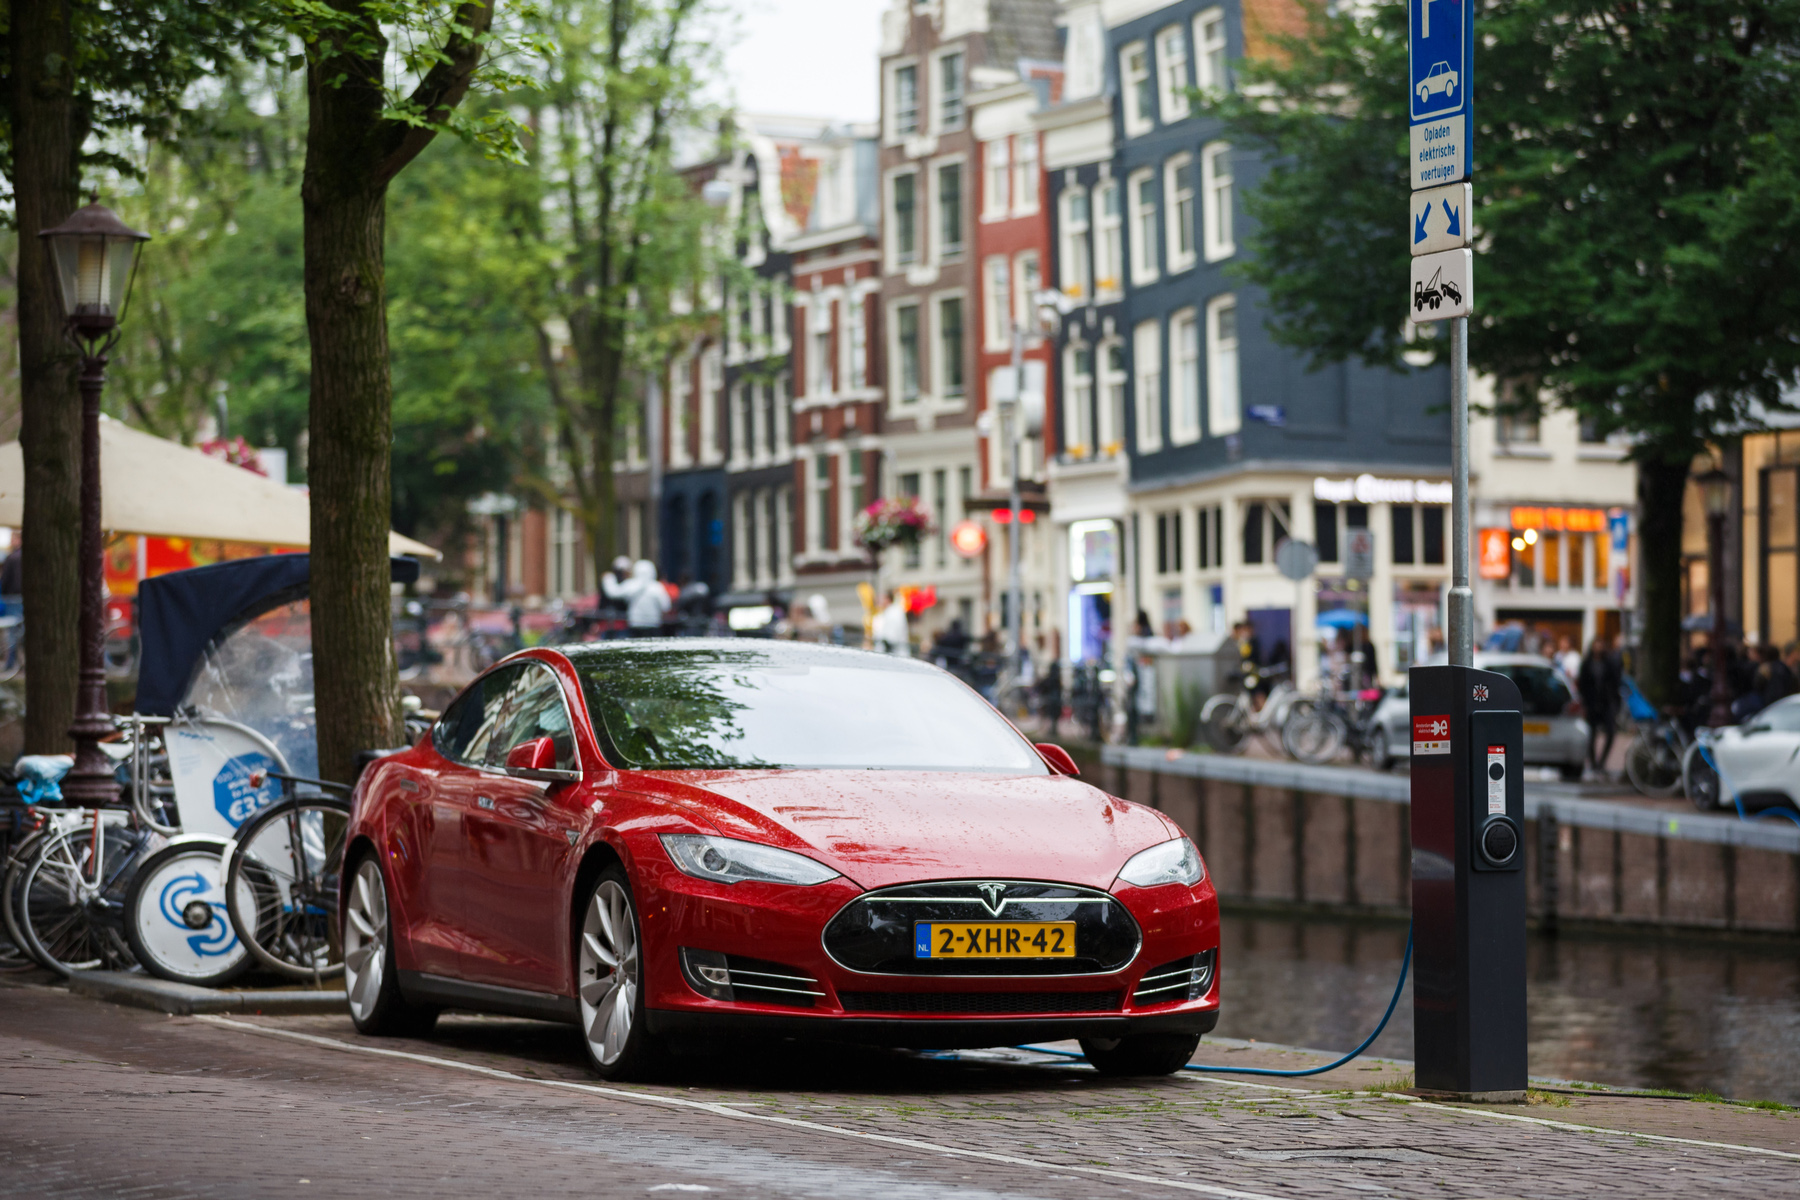 An electric car charging in Amsterdam